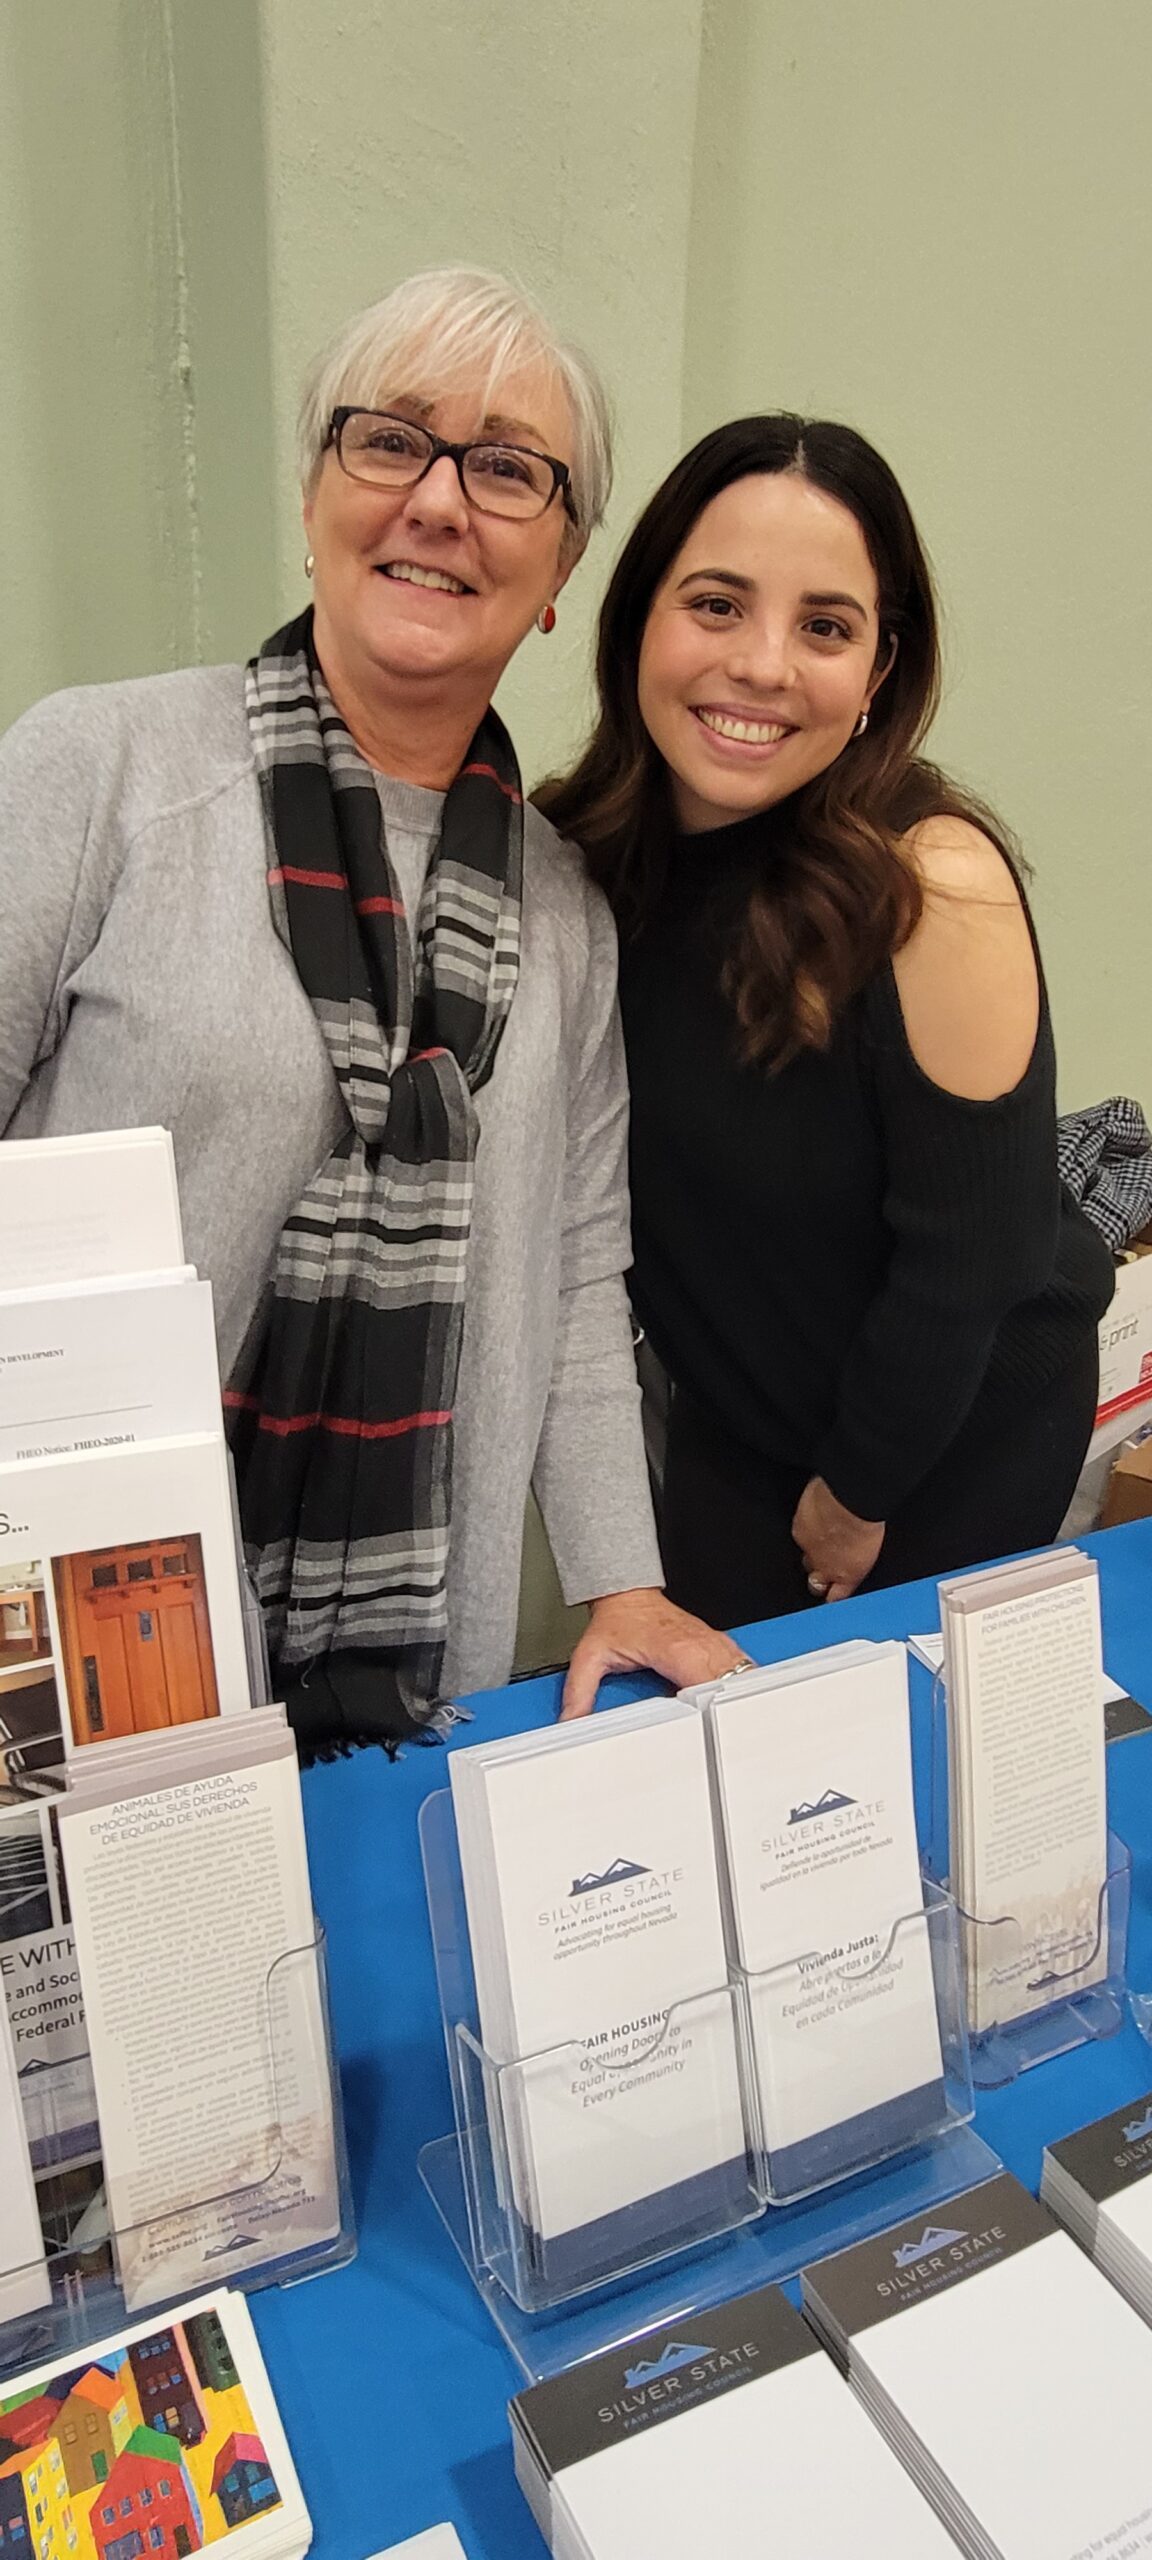 Two women standing in front of a table with books on it.